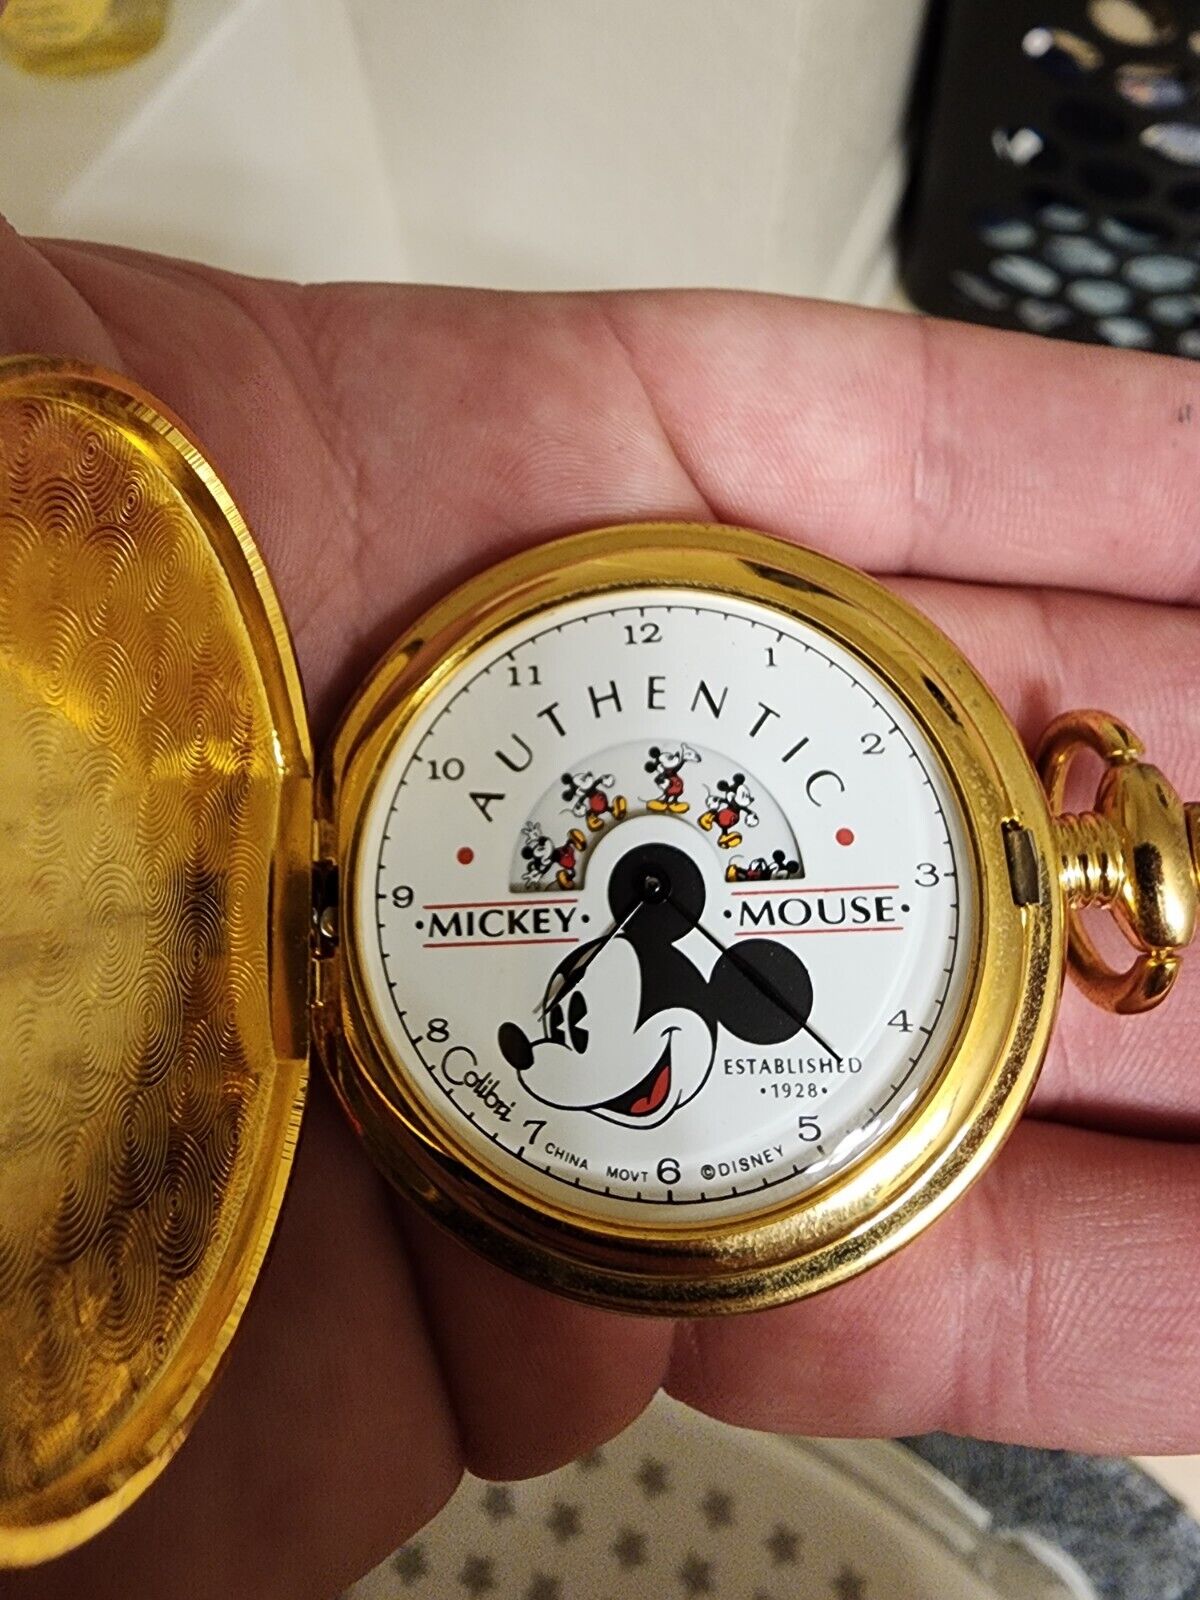 Extremely Rare Colibri Mickey Mouse Pocket Watch